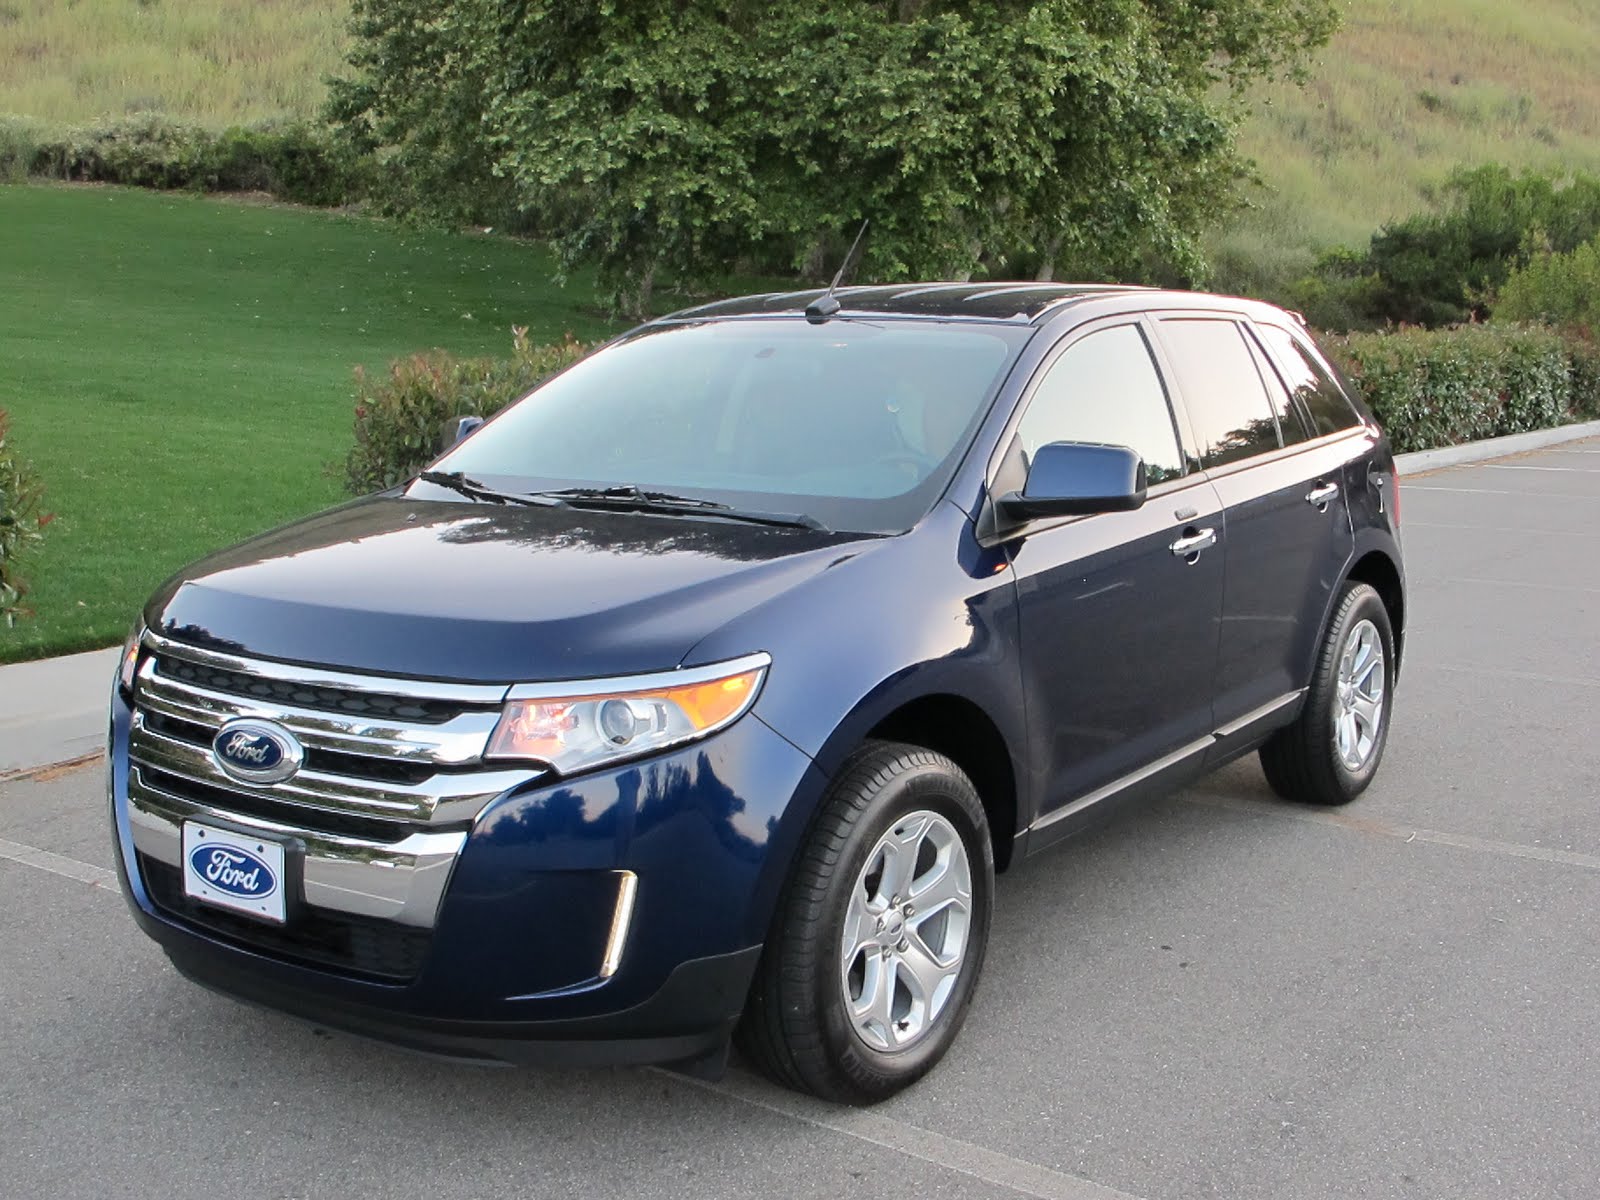 2011 Ford edge road test reviews #10